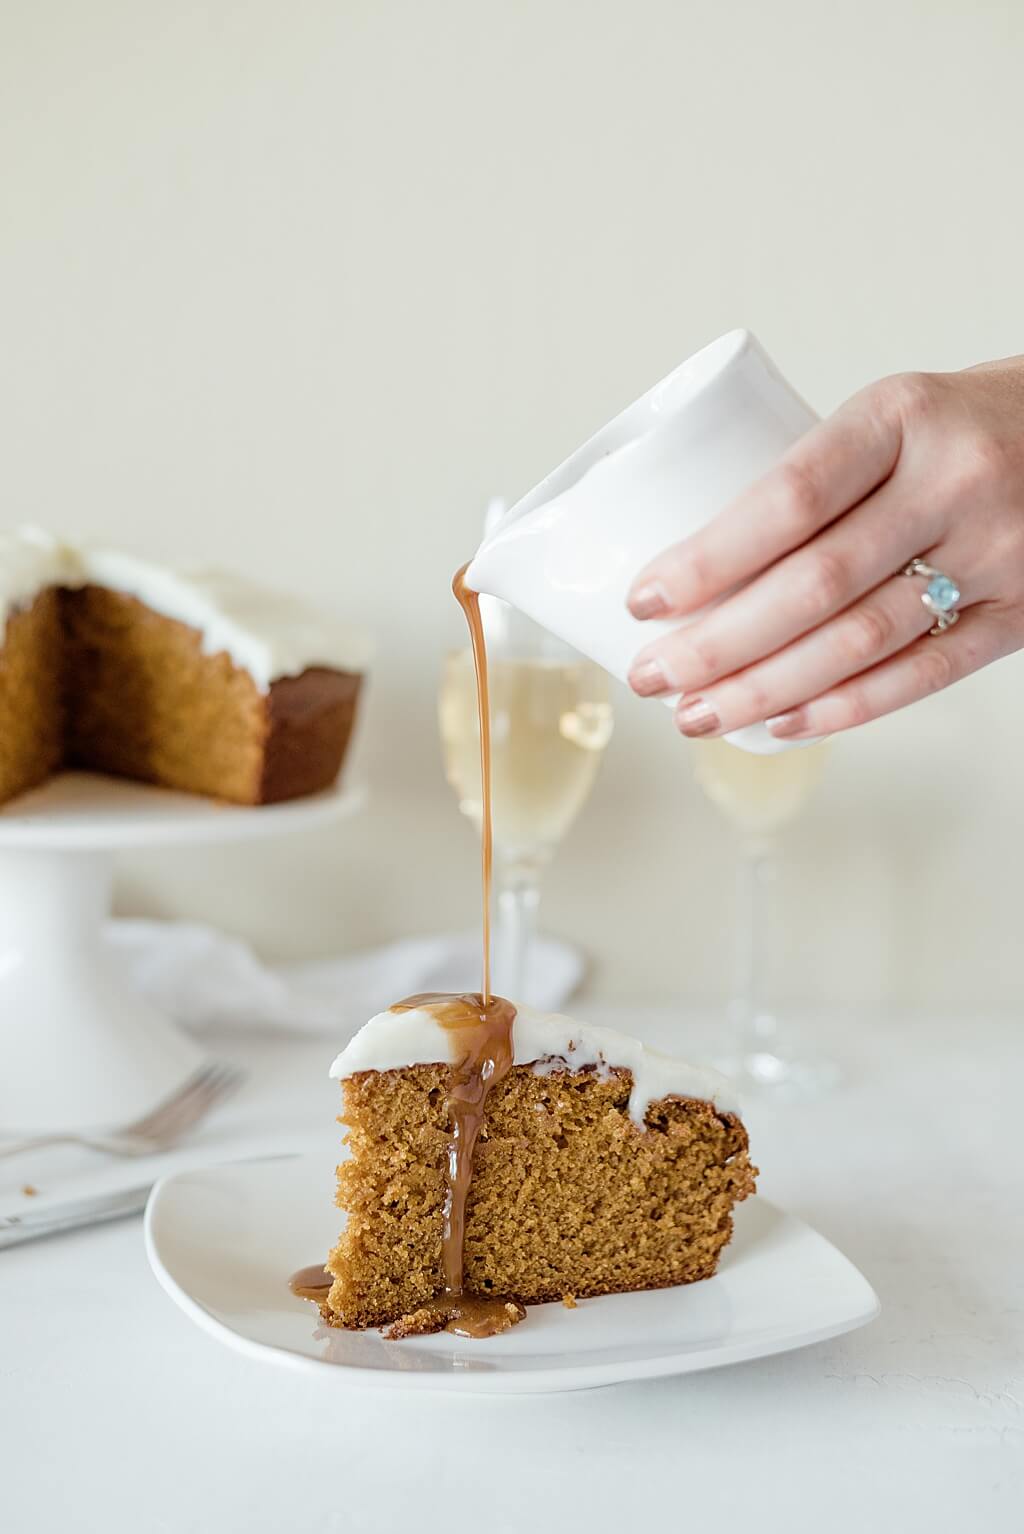 Coconut sugar caramel sauce is drizzled on top of a triangular slice of iced pumpkin cake. The cake sits on a pedestal in the background next to two filled champagne flutes.